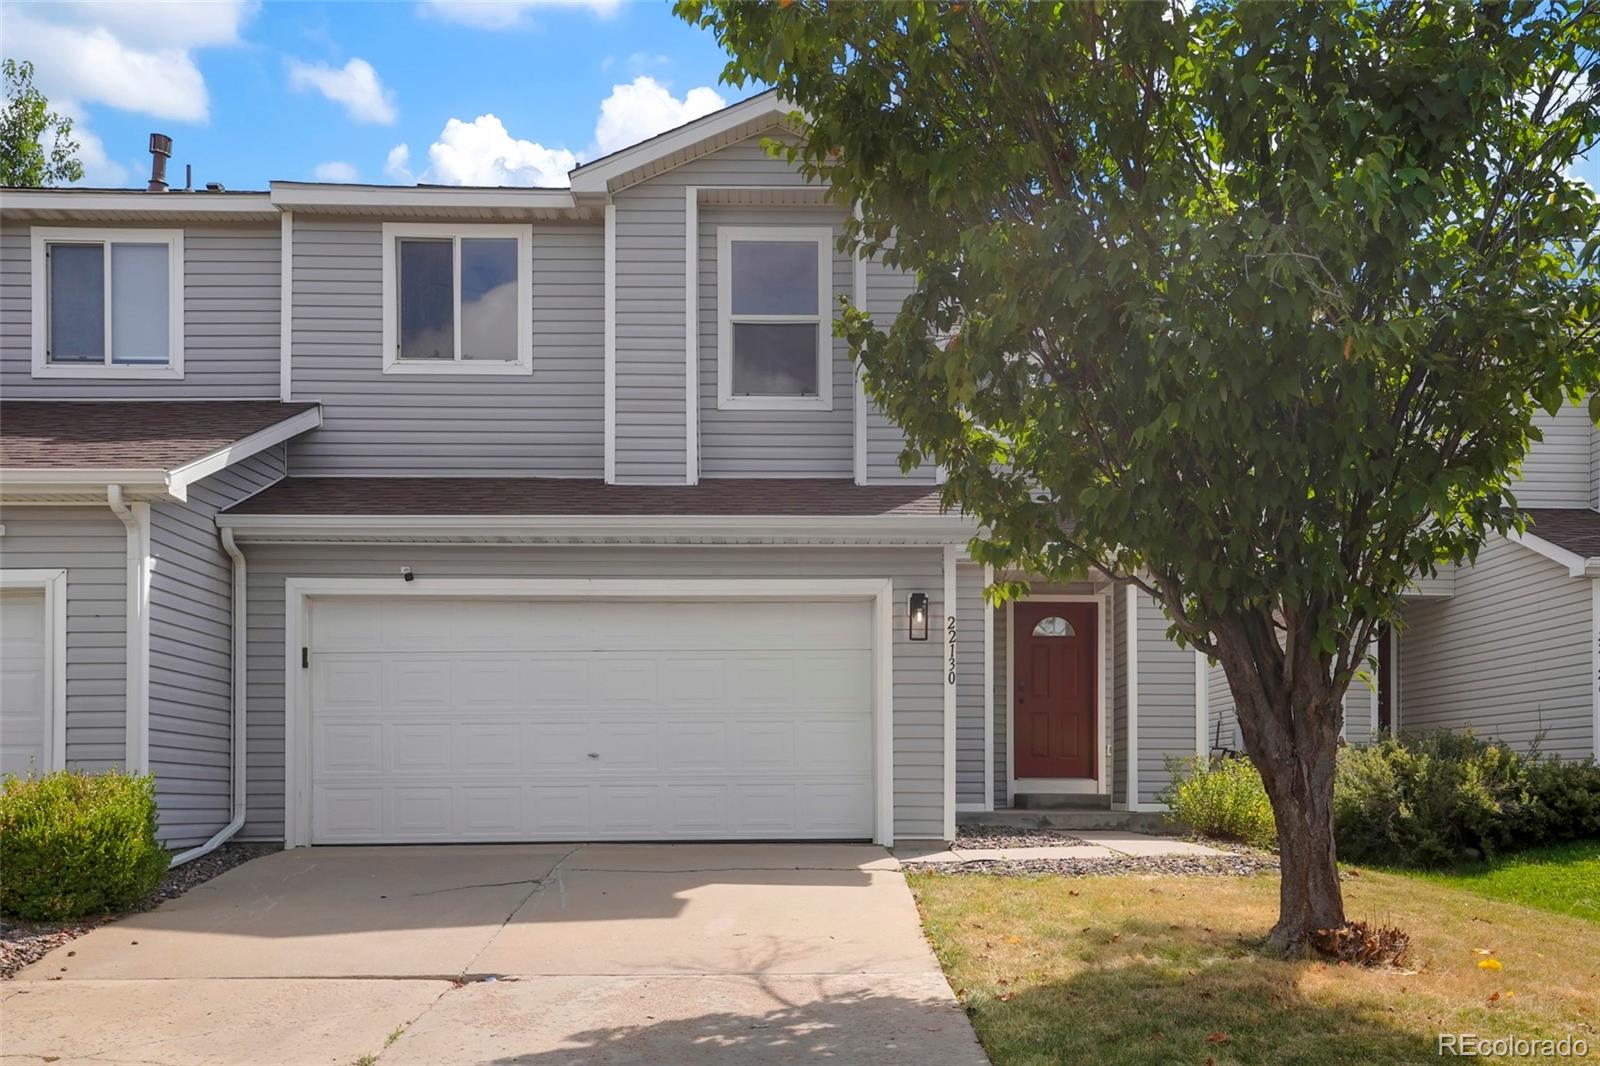 22130 e berry place, Aurora sold home. Closed on 2024-01-17 for $450,000.